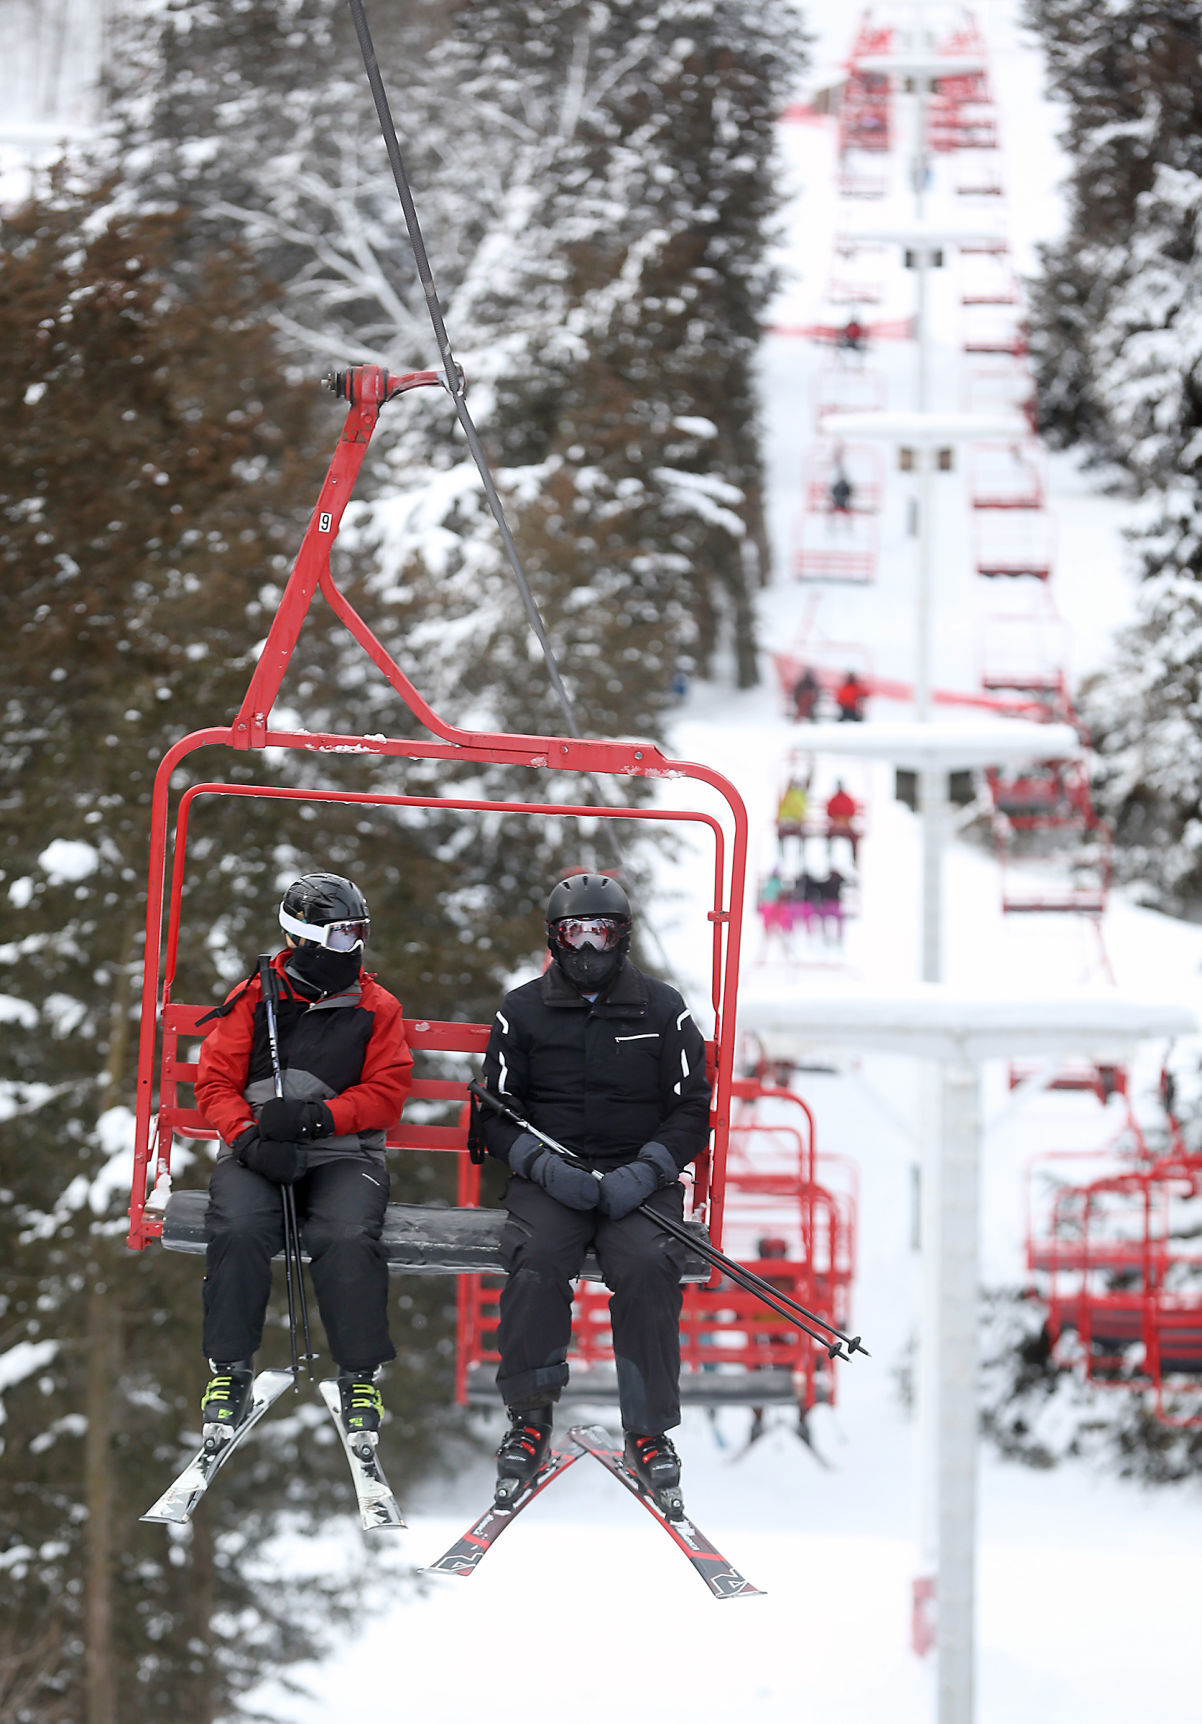 Skiers use a chairlift at Sundown Mountain Resort in rural Dubuque on Sunday. PHOTO CREDIT: JESSICA REILLY